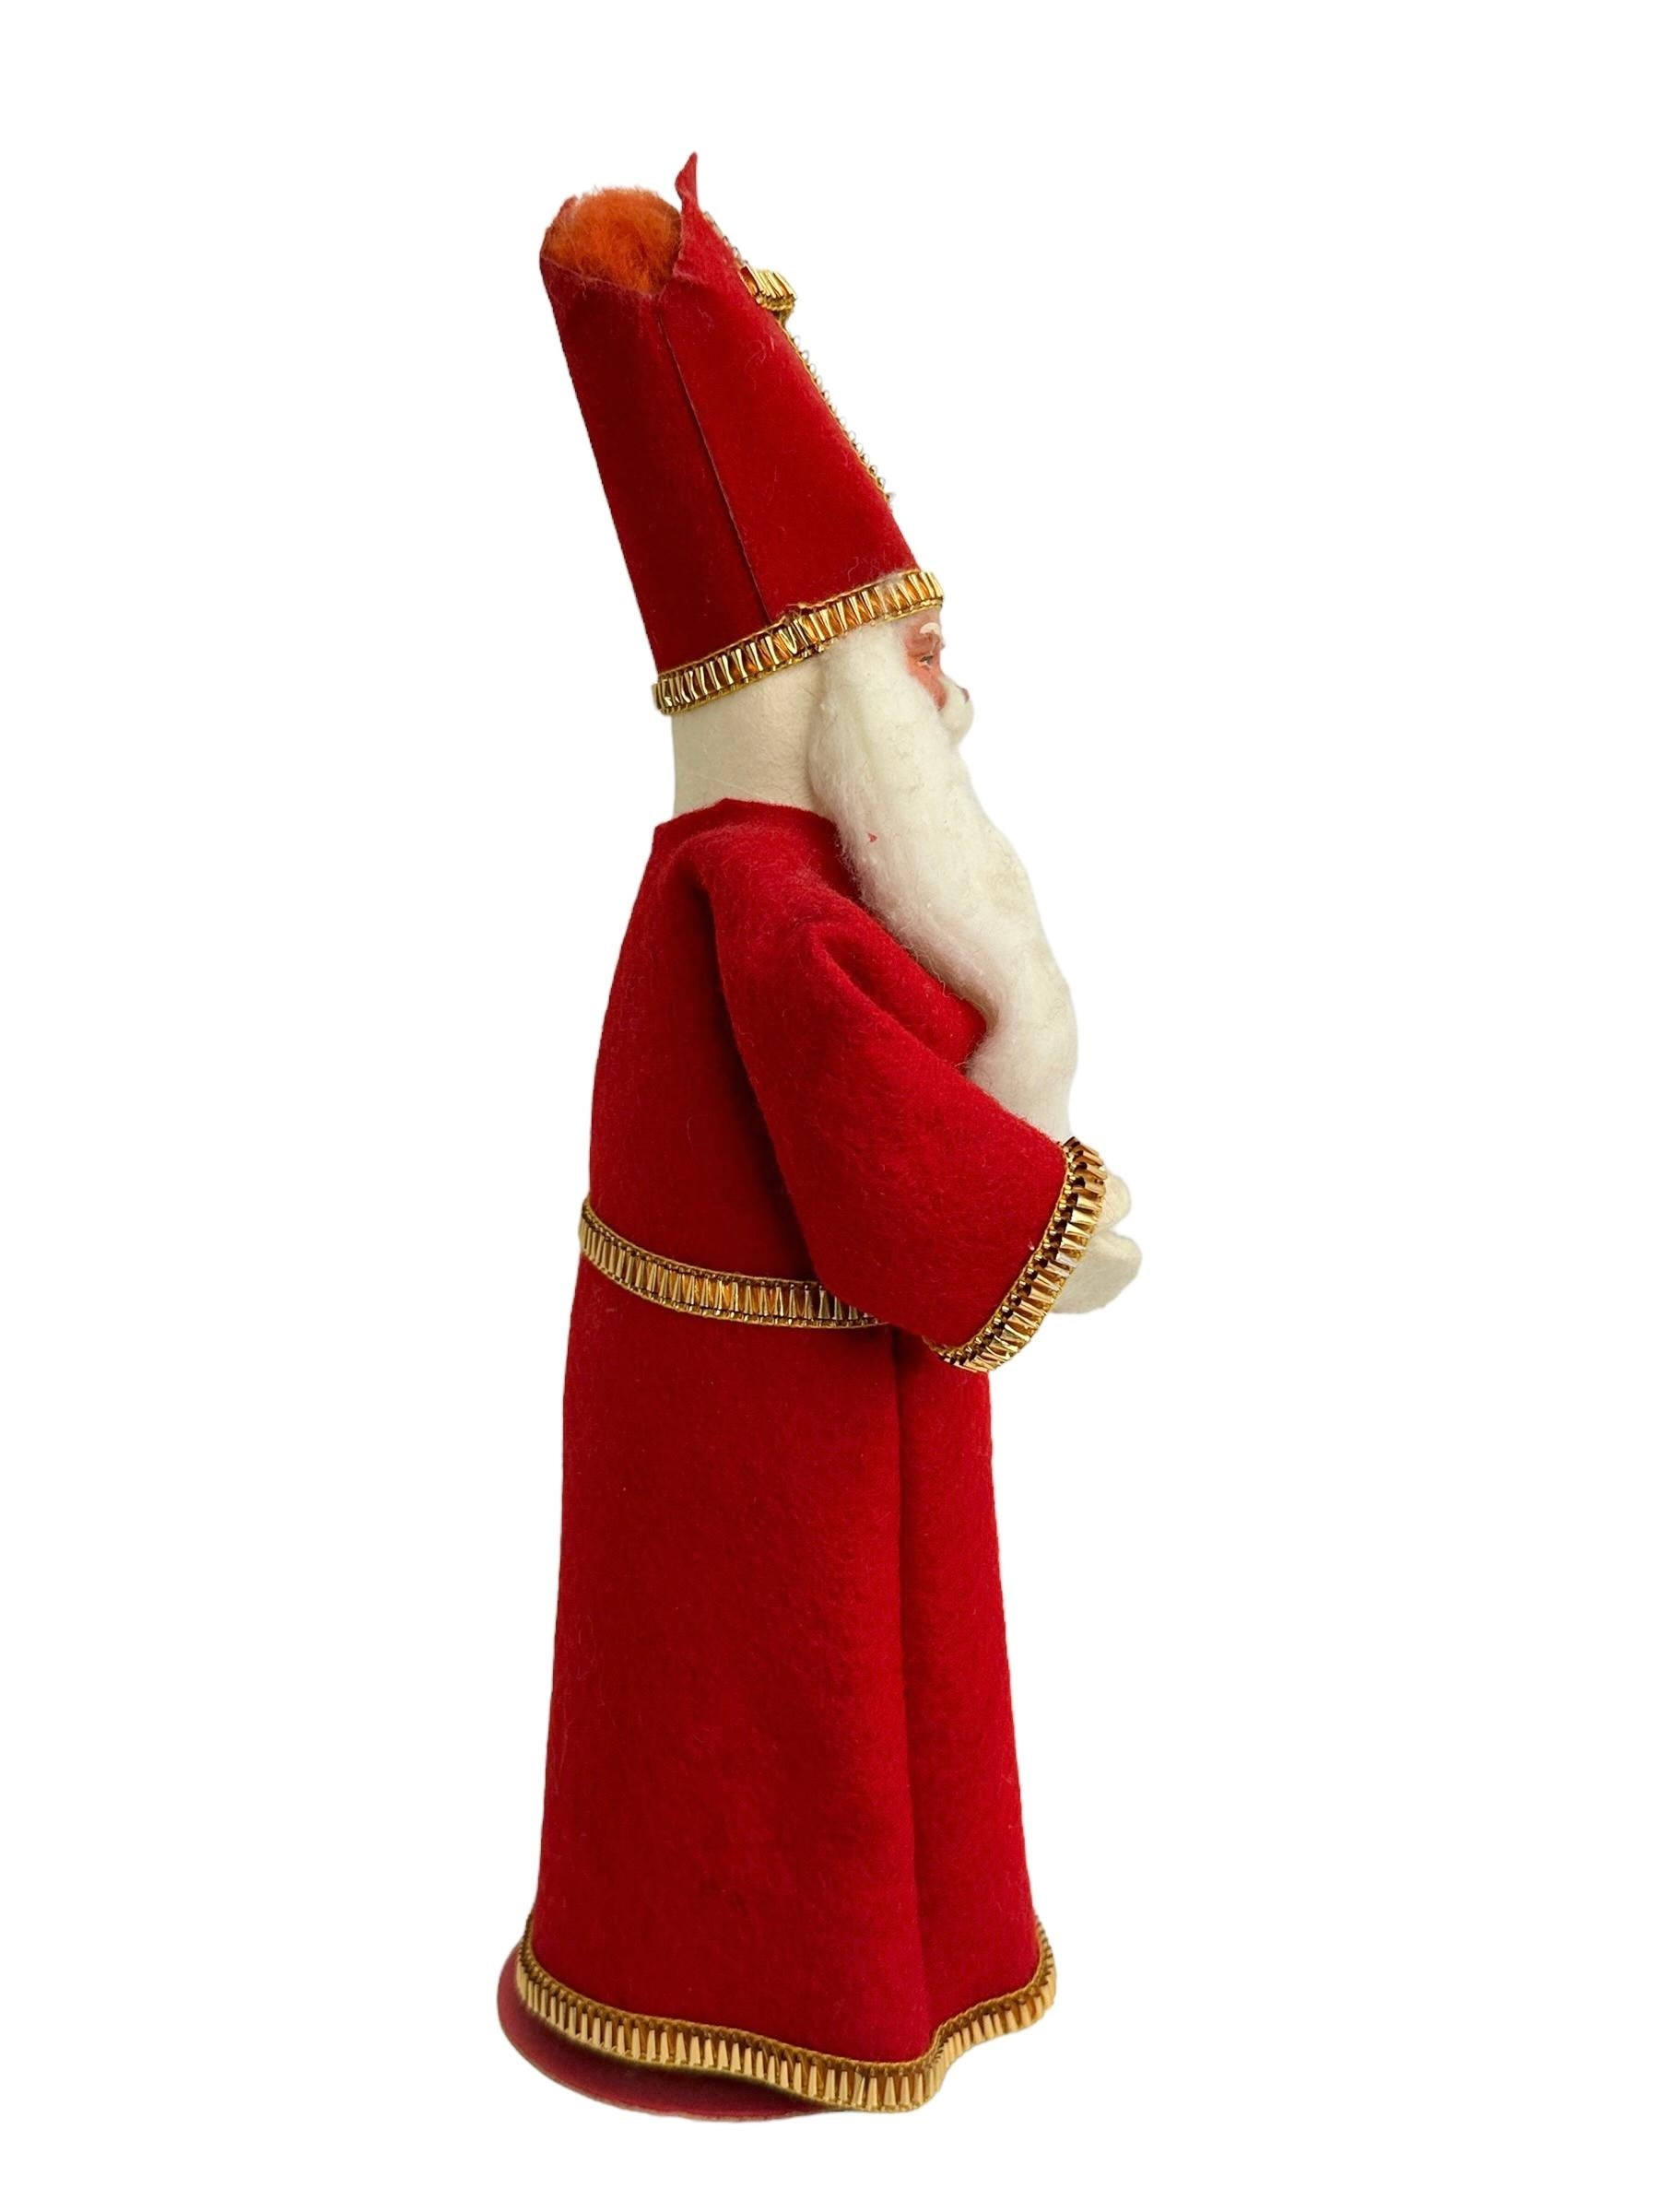 This vintage St.Nicholas, Santa Claus Christmas Figurine made of composition, cardboard, felting and Papermache was made in the 20th century and is a charming addition to any Christmas collection. This original period piece was made in Germany and